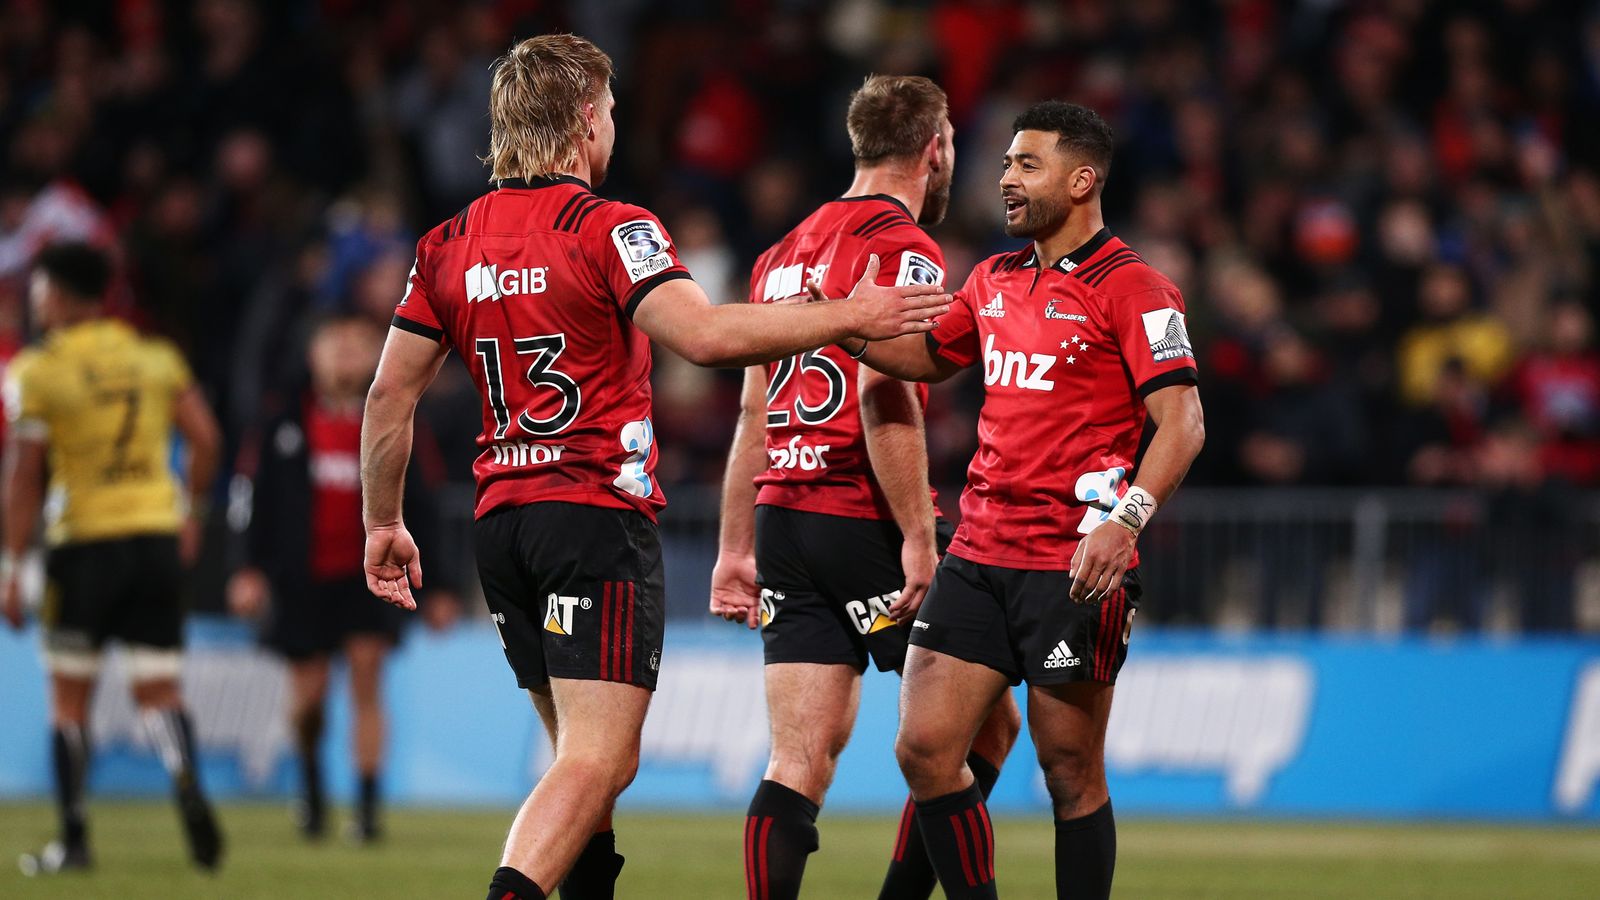 Crusaders 30 26 Hurricanes Match Report & Highlights